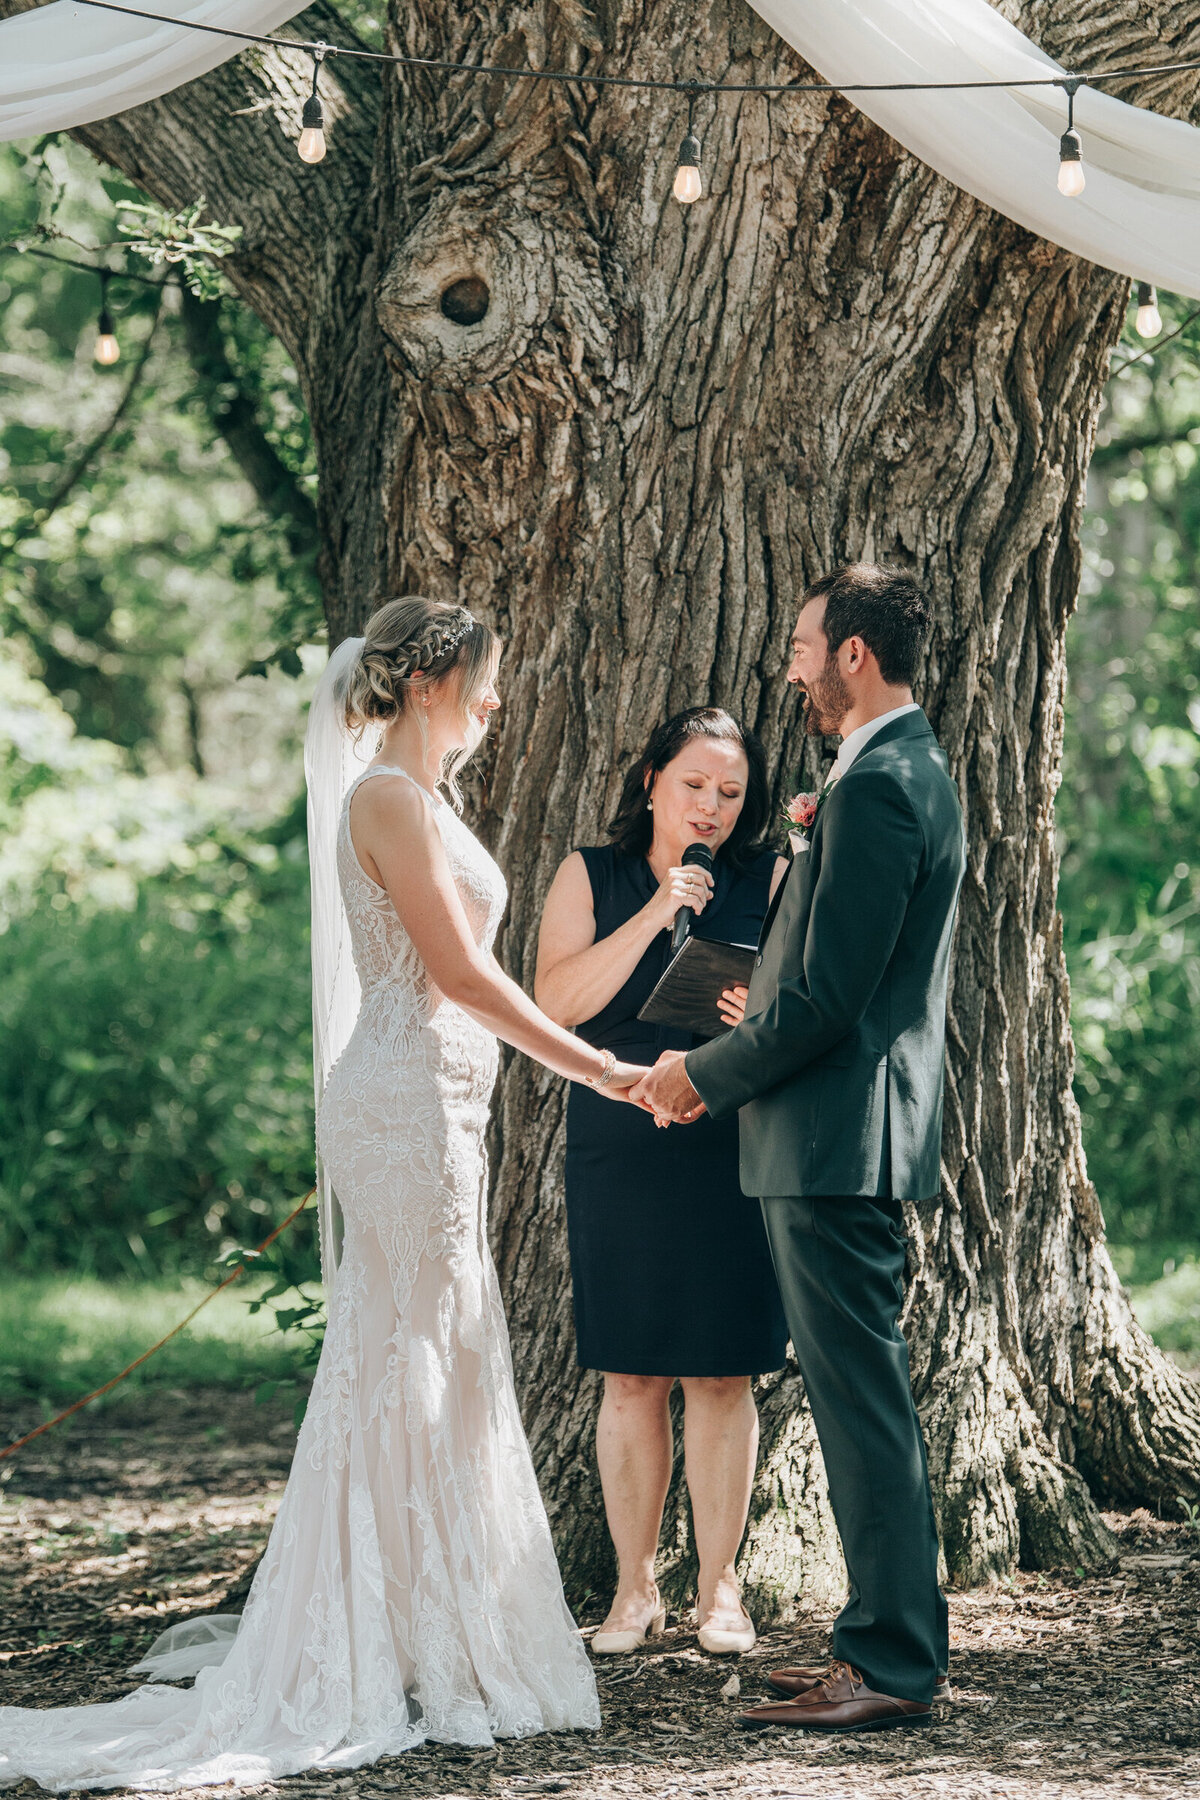 Bride and groom saying their wedding vows under a grand willow tree